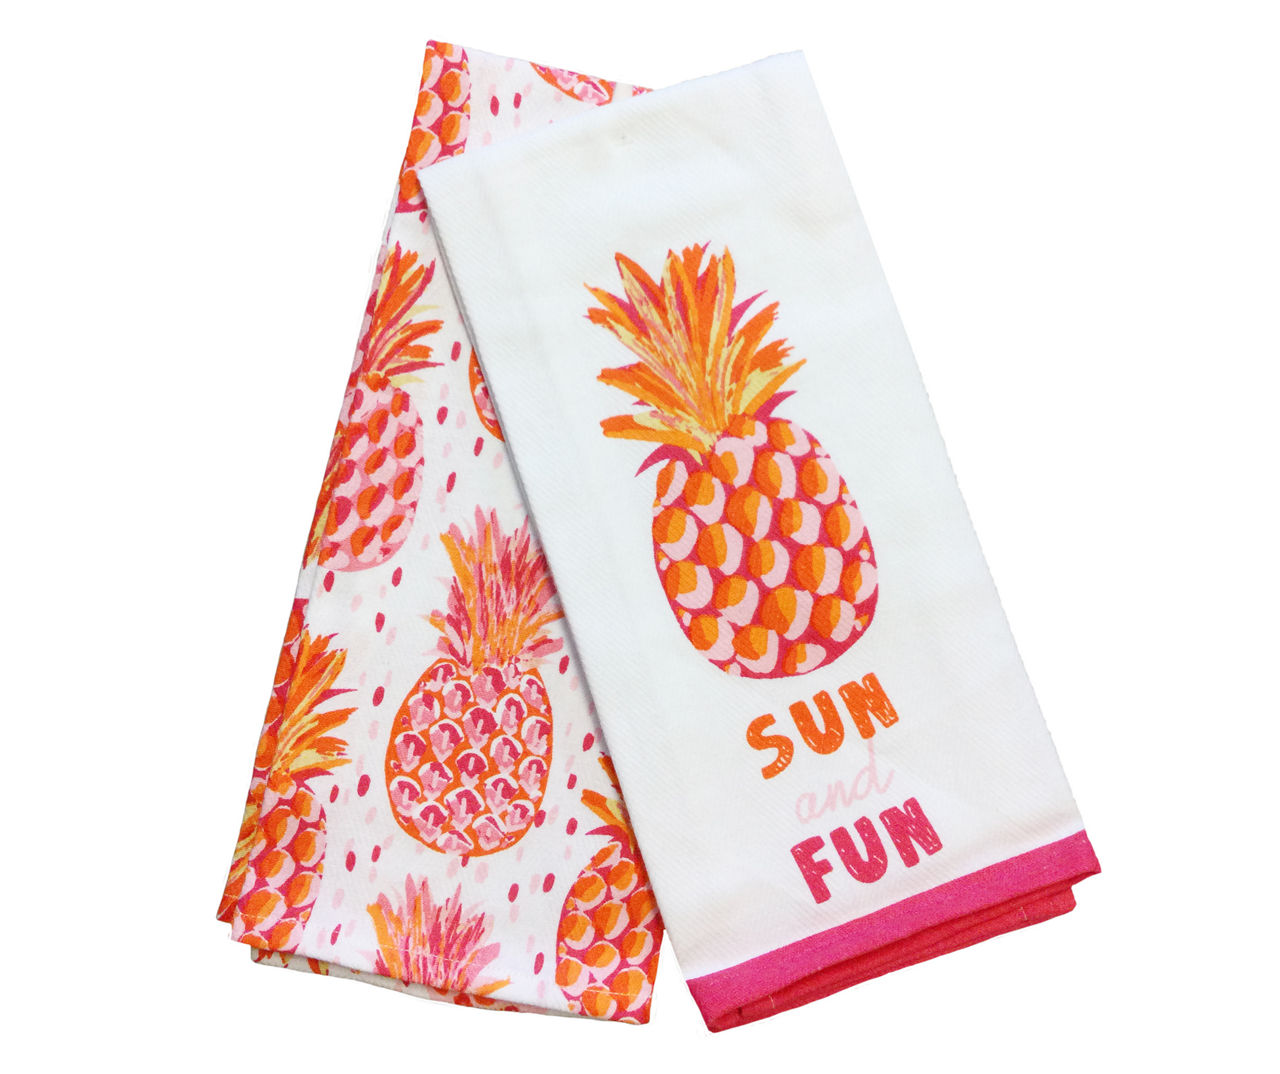 Funny White Kitchen Towels